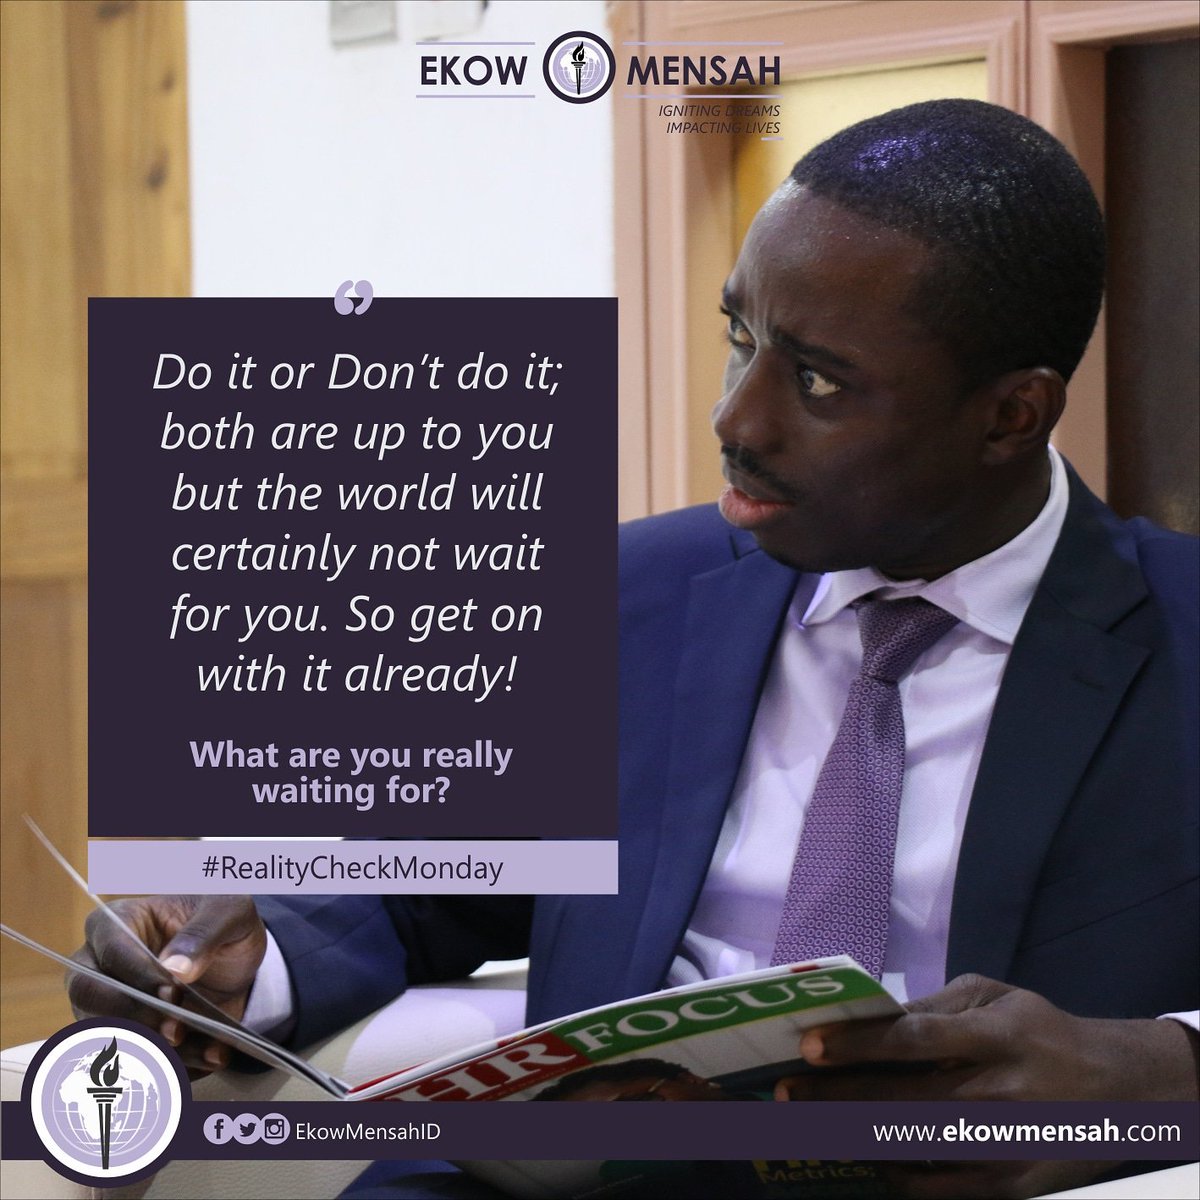 Welcome to Reality Check Monday - What are you really waiting for? 

Do it or Don't do it; both are up to you but the world will certainly not wait for you. So get on with it already! 

#RealityCheck
#ModayMotivation
#EkowMensahQuotes
#IgnitingDreams
#YourDreamsMatter